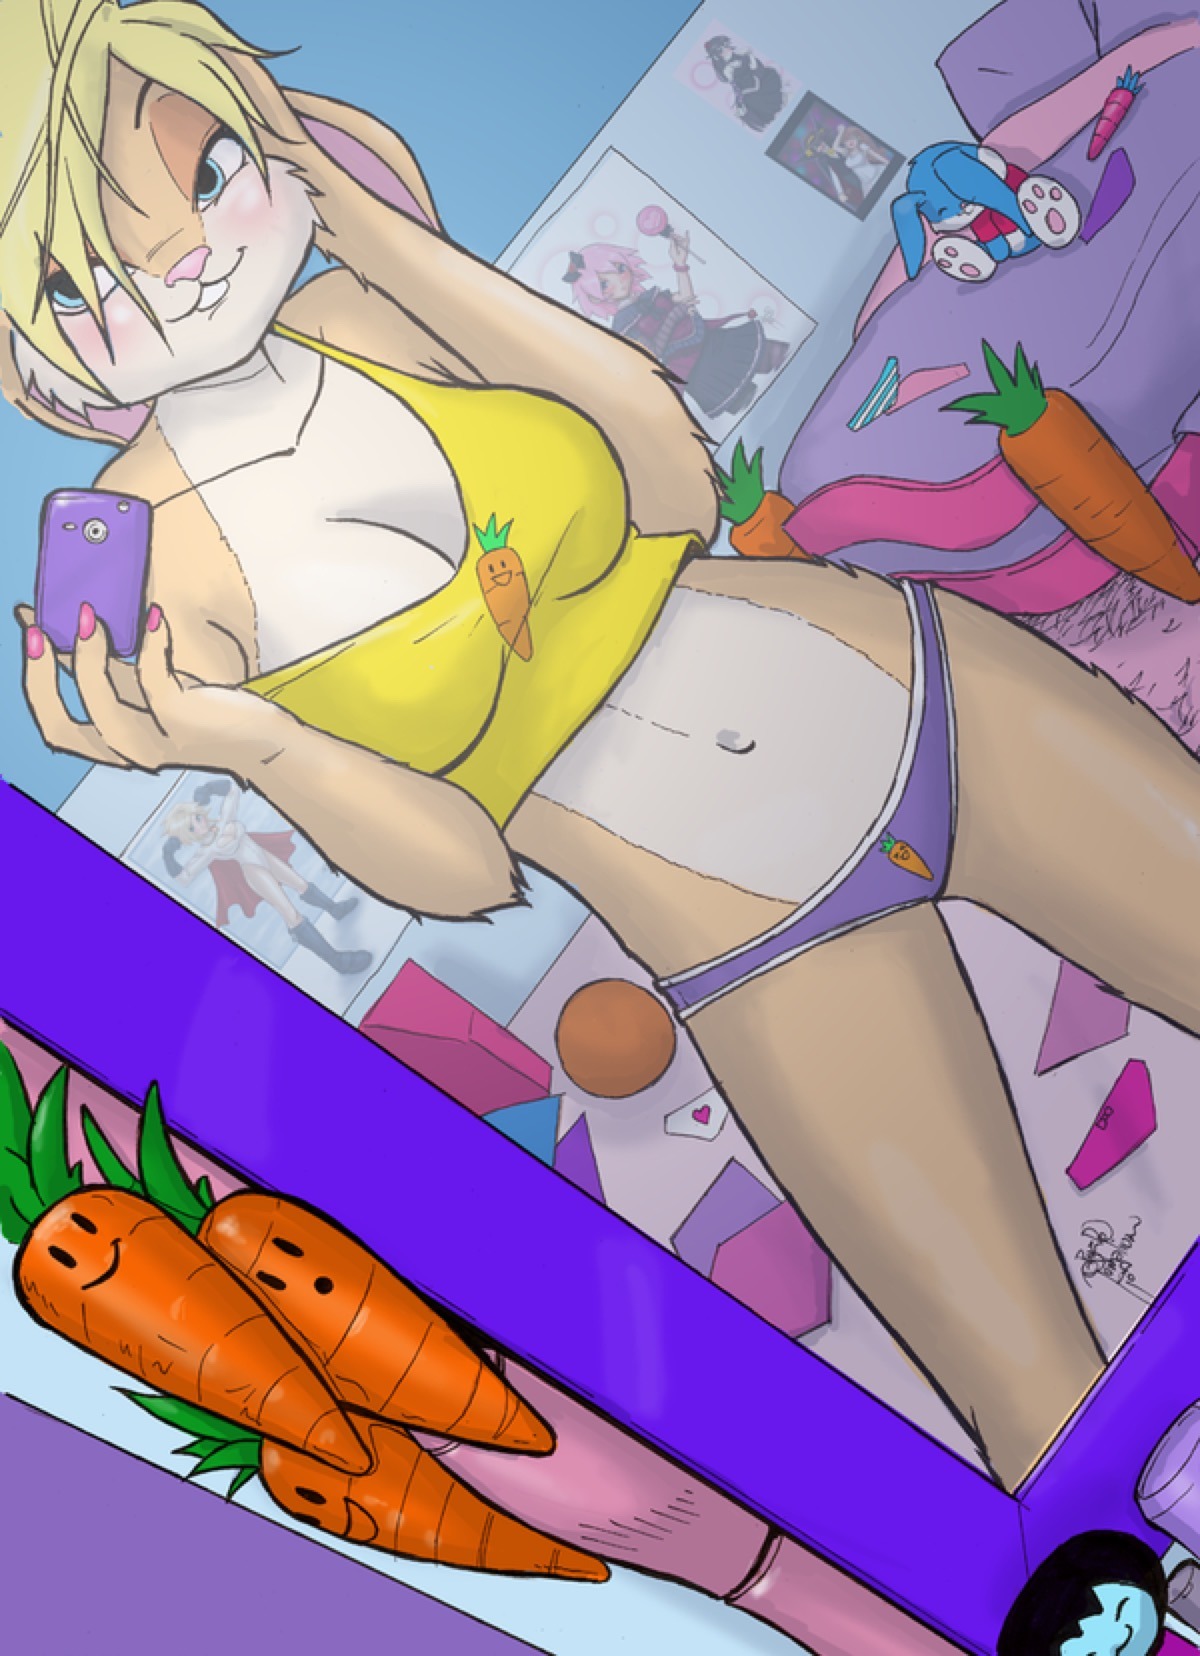 Lola bunny as requested